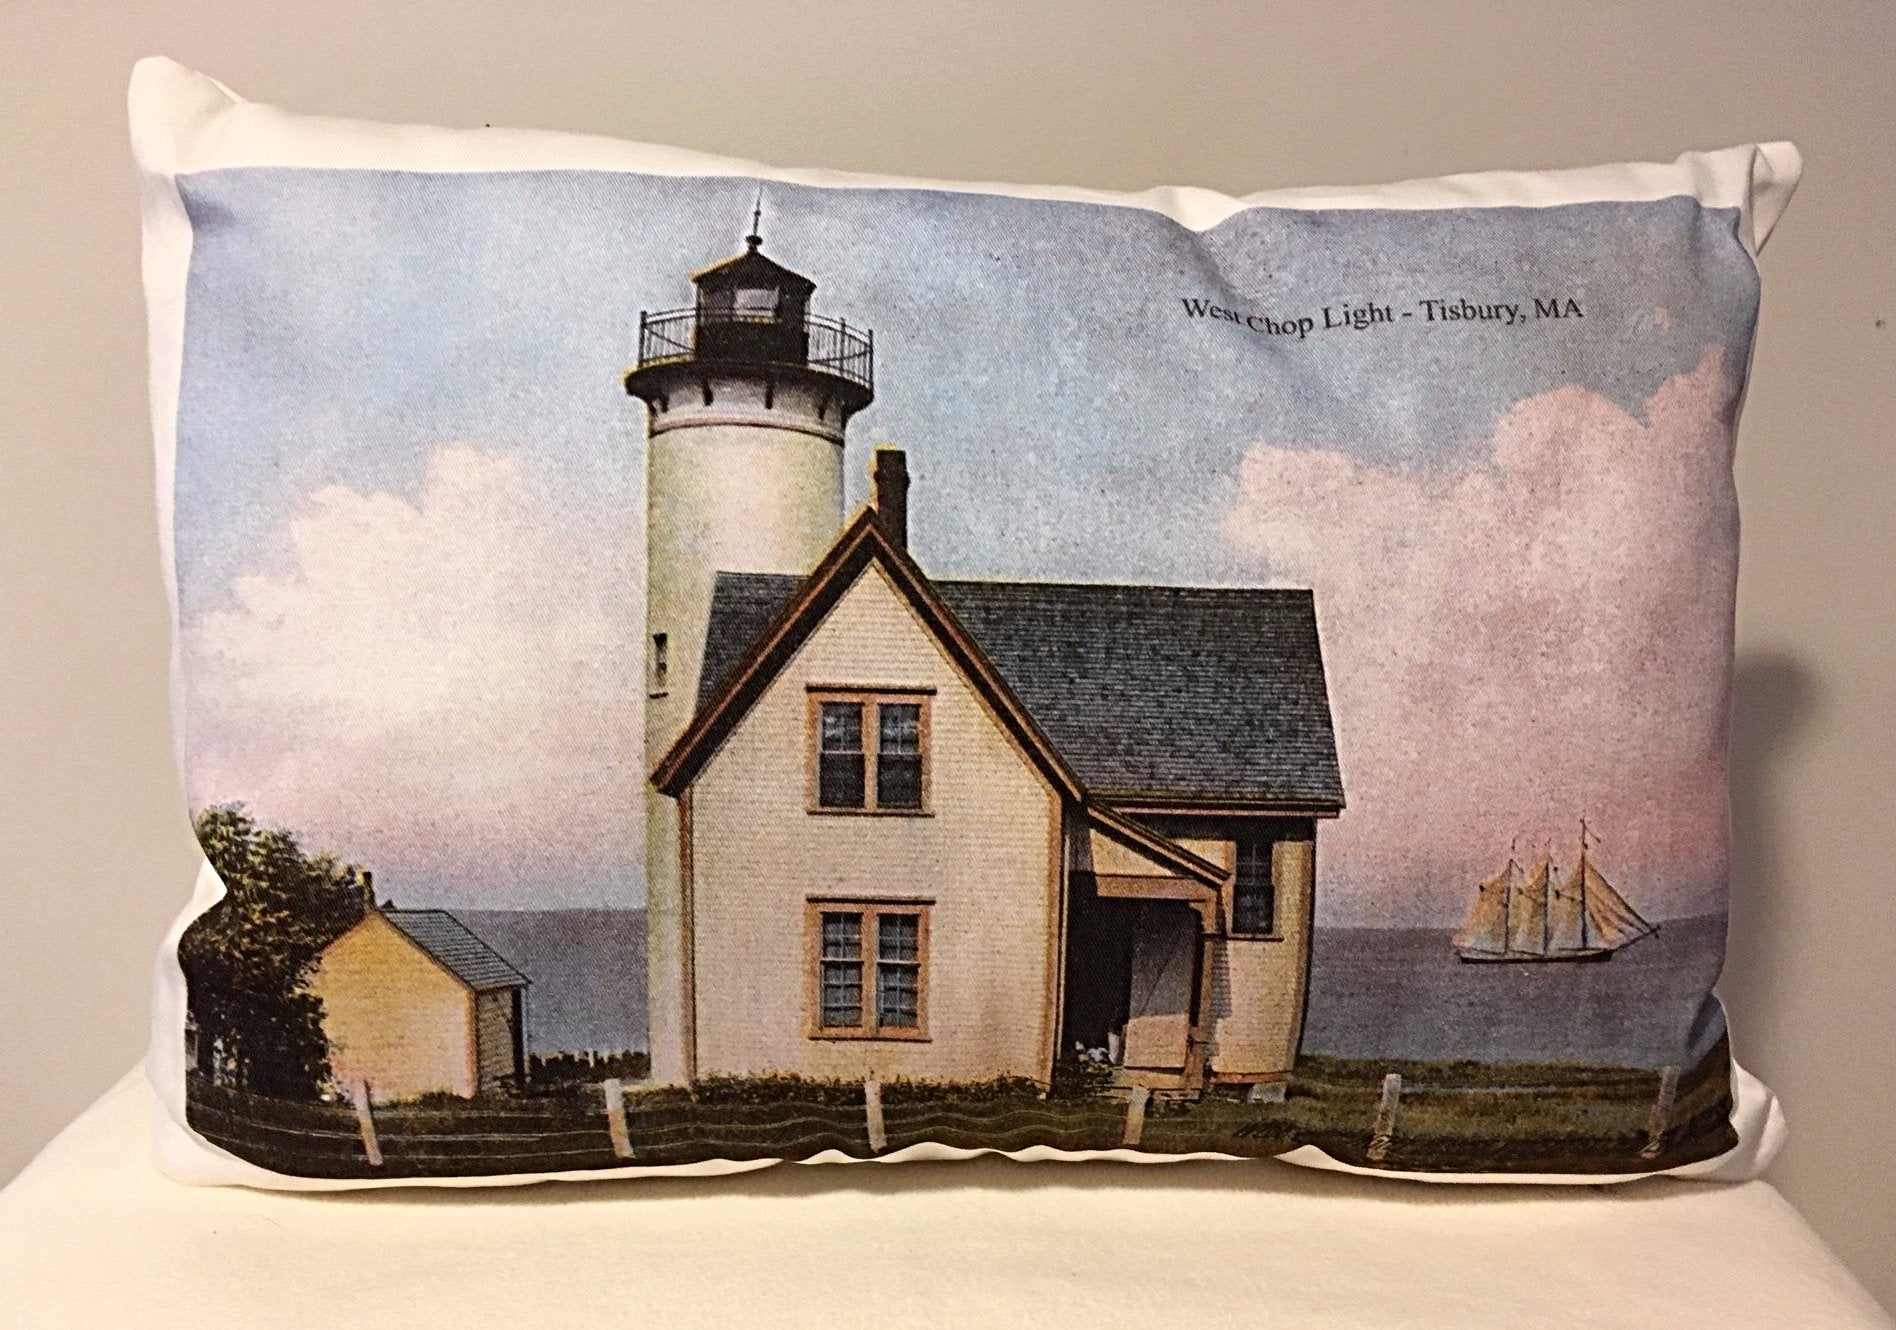 West Chop Lighthouse Day & Night Two-Sided Pillow - That Fabled Shore Home Decor